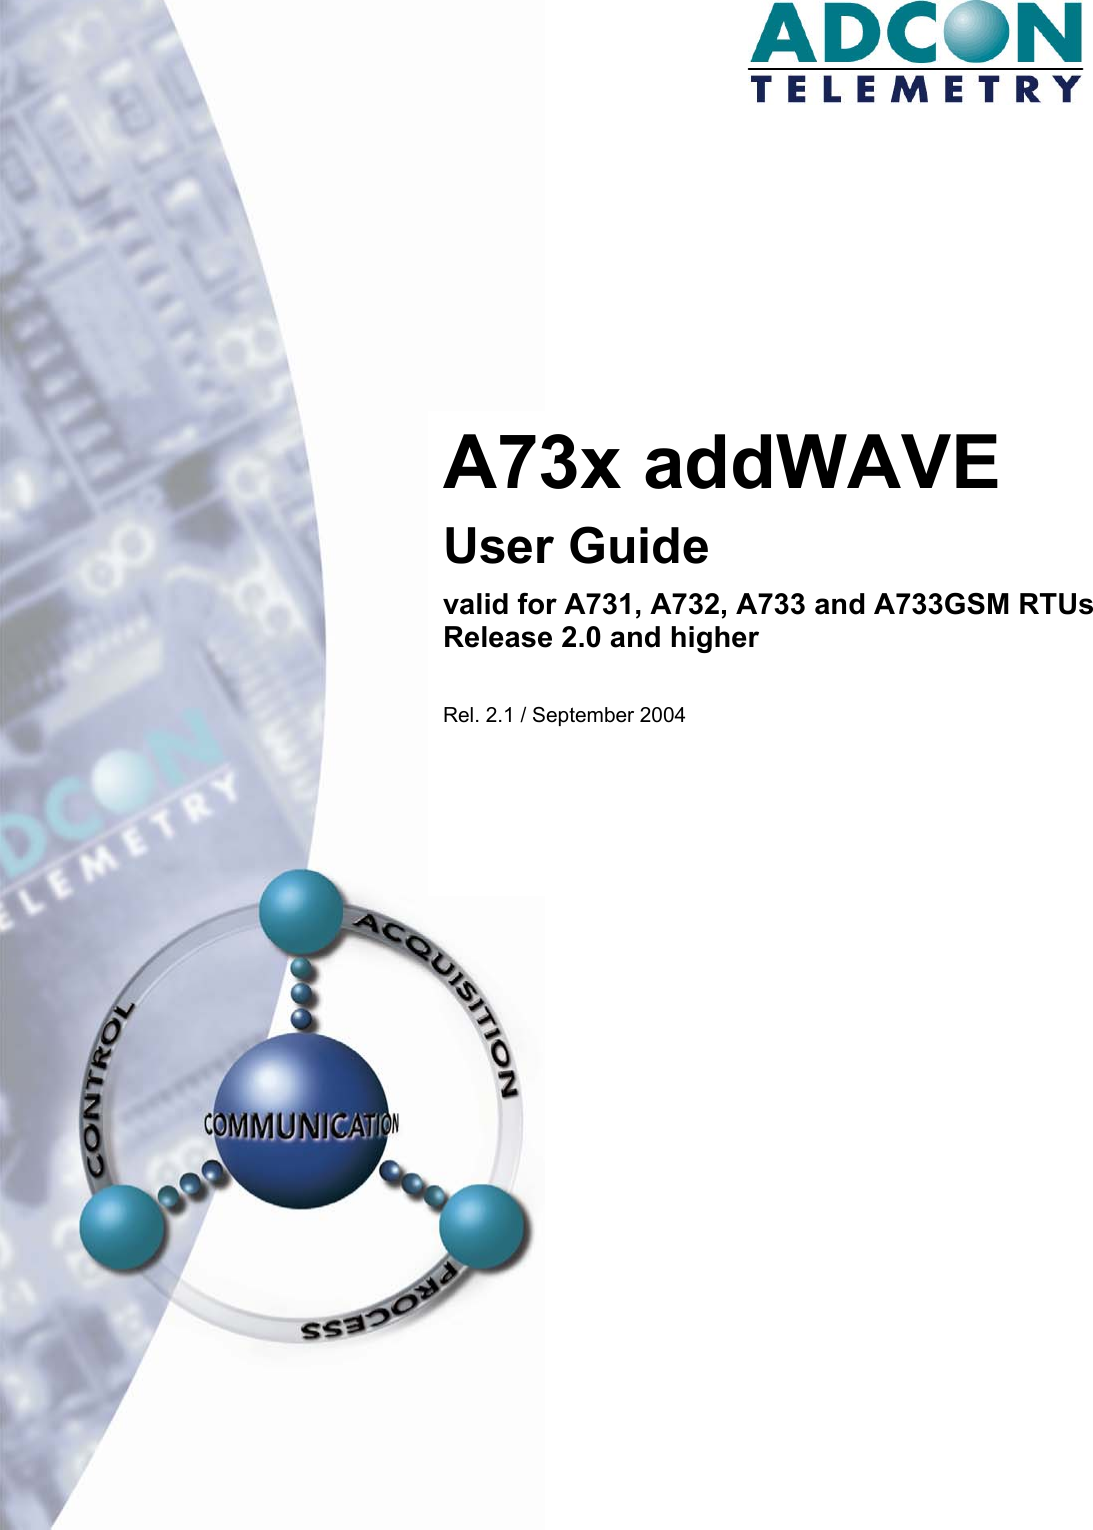        A73x addWAVE User Guide valid for A731, A732, A733 and A733GSM RTUs  Release 2.0 and higher  Rel. 2.1 / September 2004  